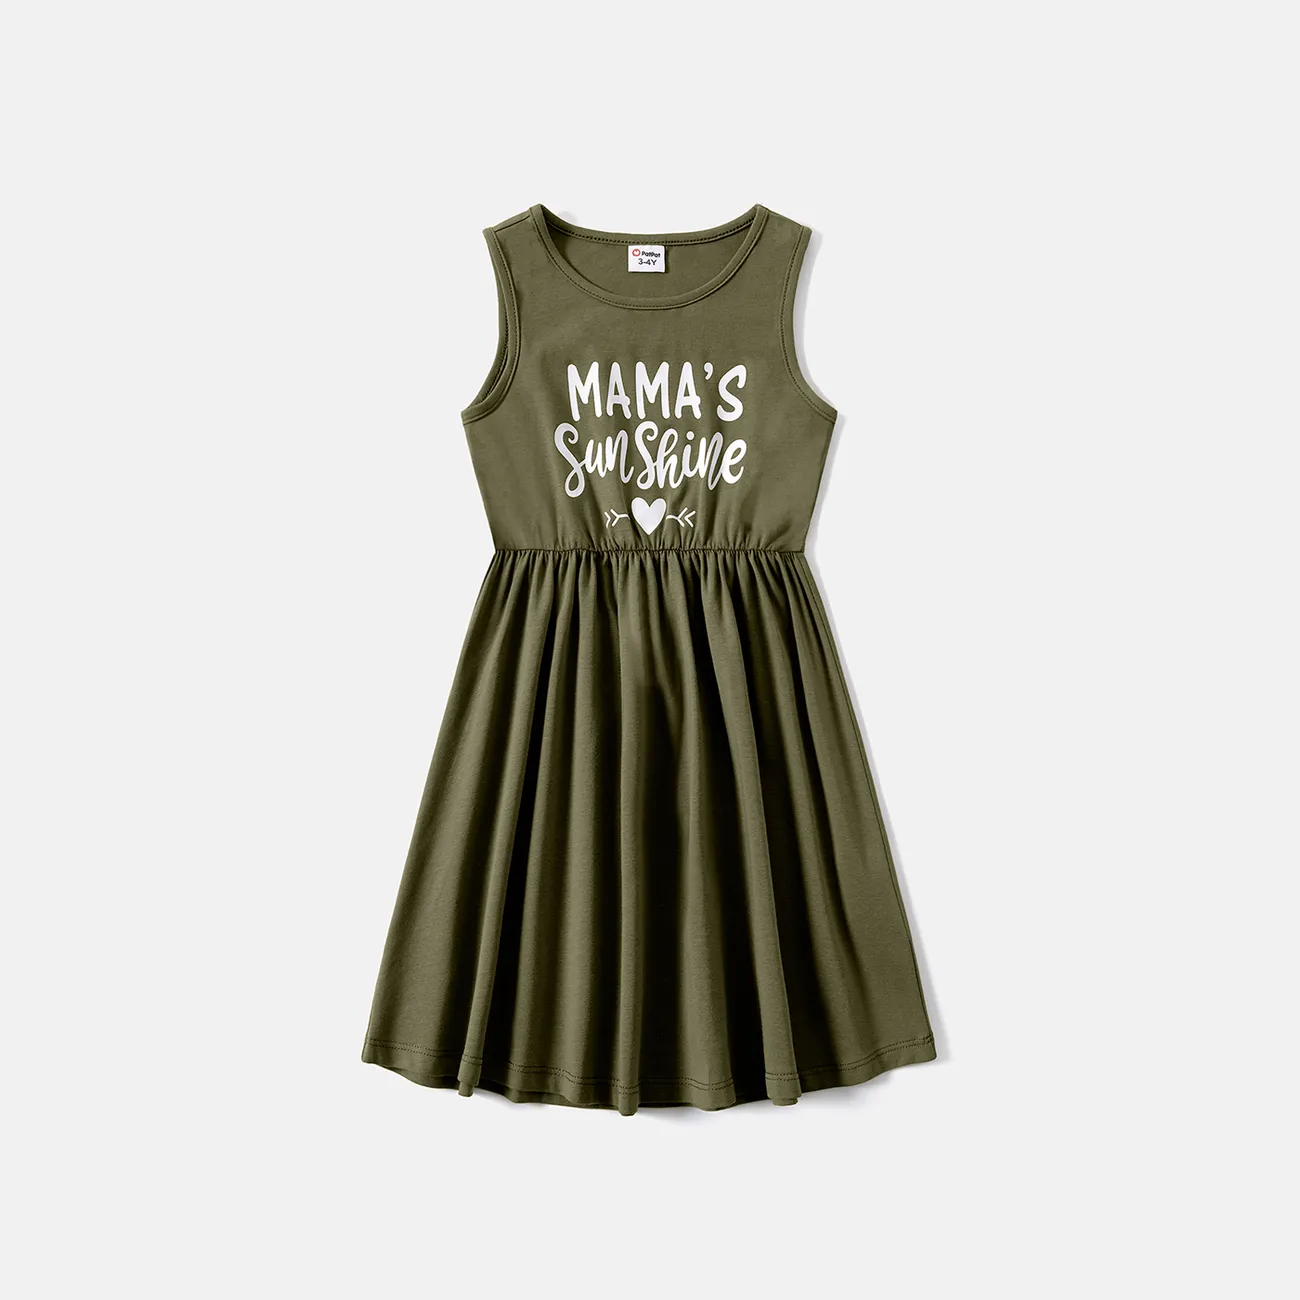 Mommy and Me 95% Cotton Sleeveless Dresses Army green big image 1